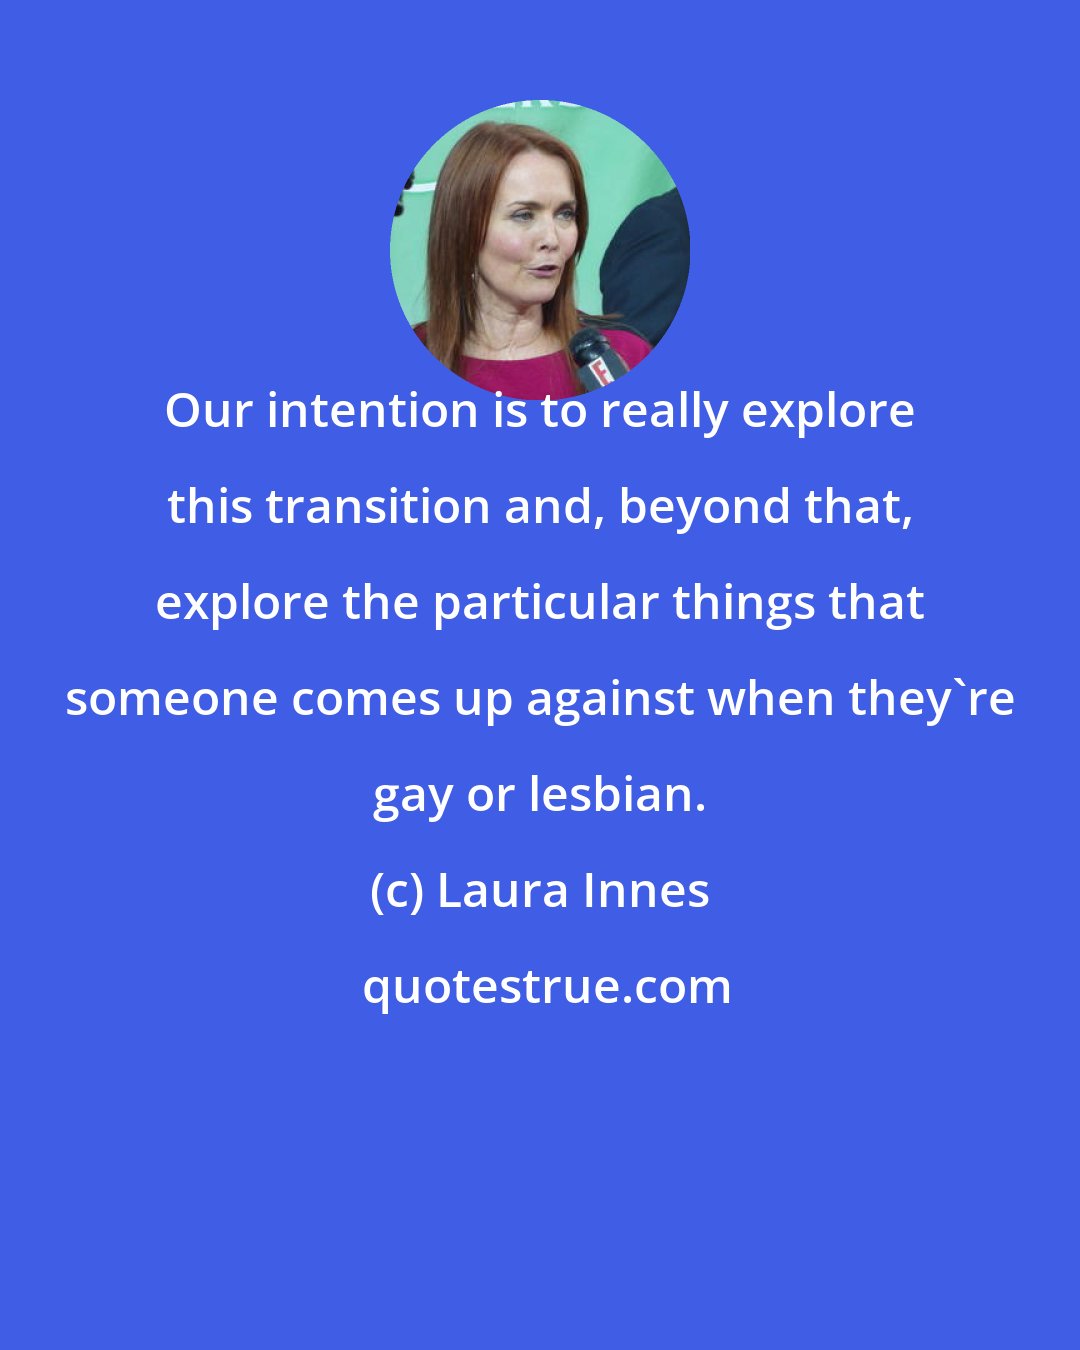 Laura Innes: Our intention is to really explore this transition and, beyond that, explore the particular things that someone comes up against when they're gay or lesbian.